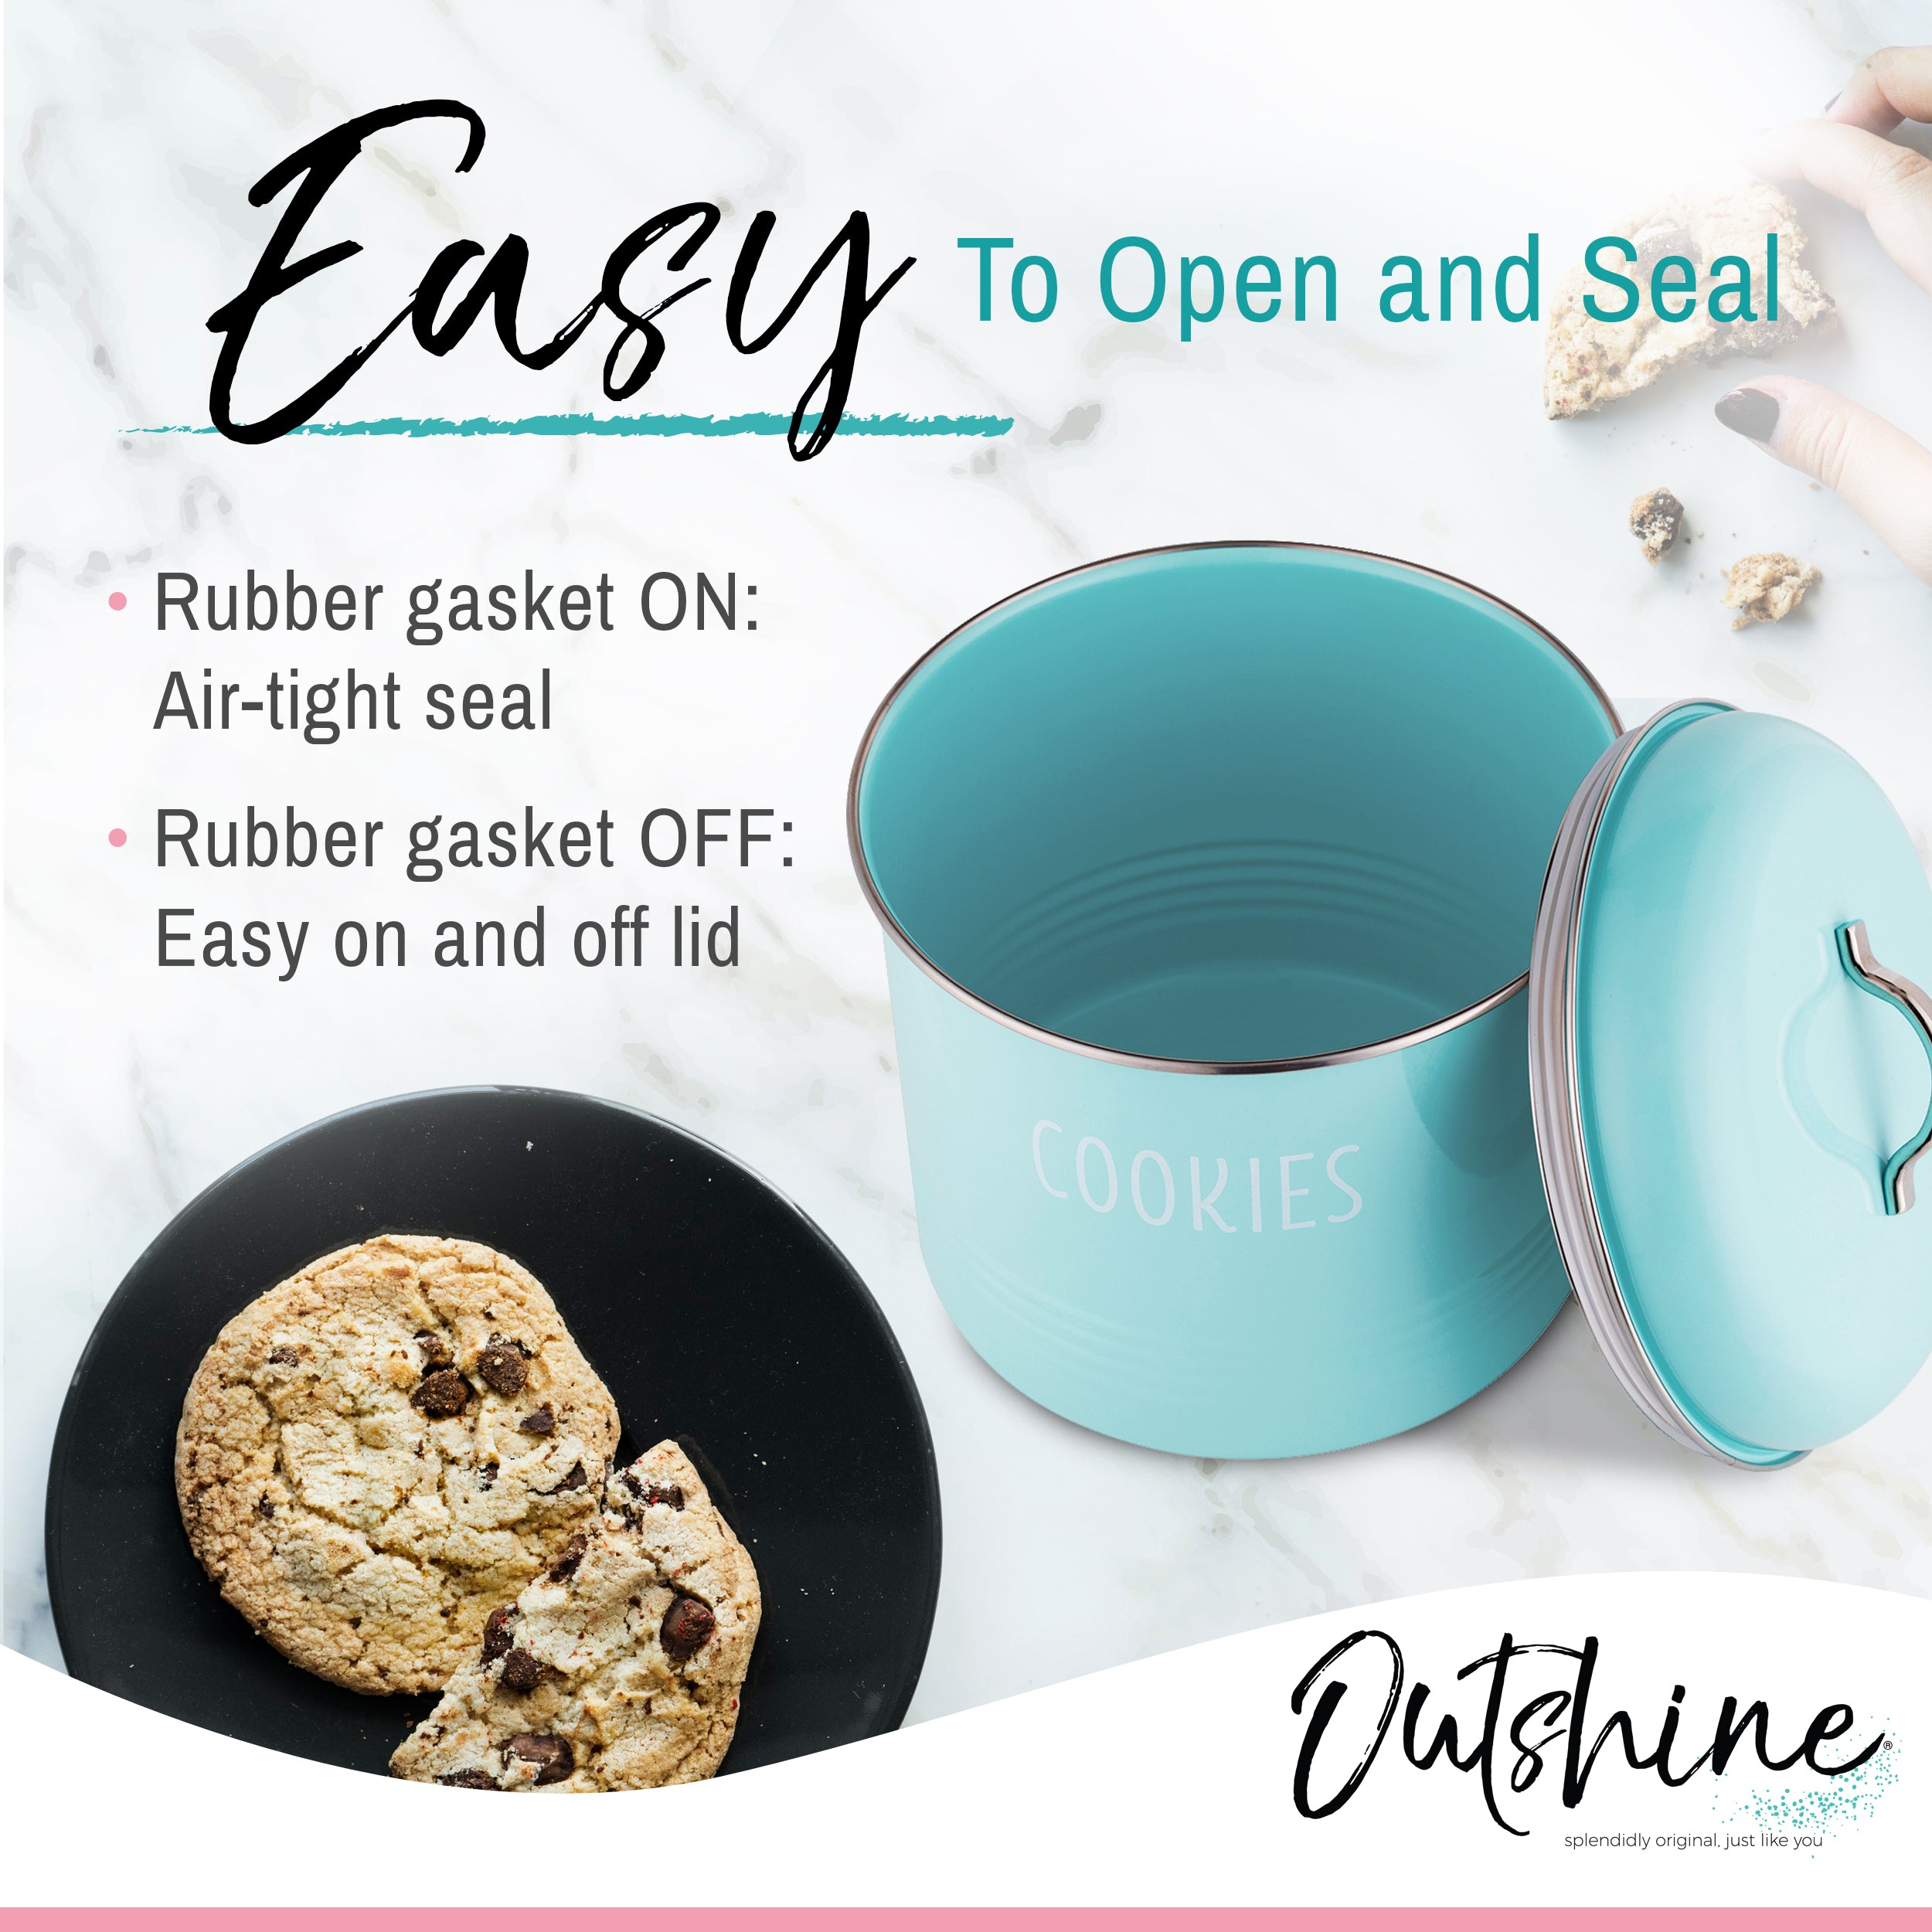 Online Shopping For Fashion Outshine Farmhouse Round Tin Snack Containers  with Lids - Set of 2 Mint/Blue, plastic snack containers with lids